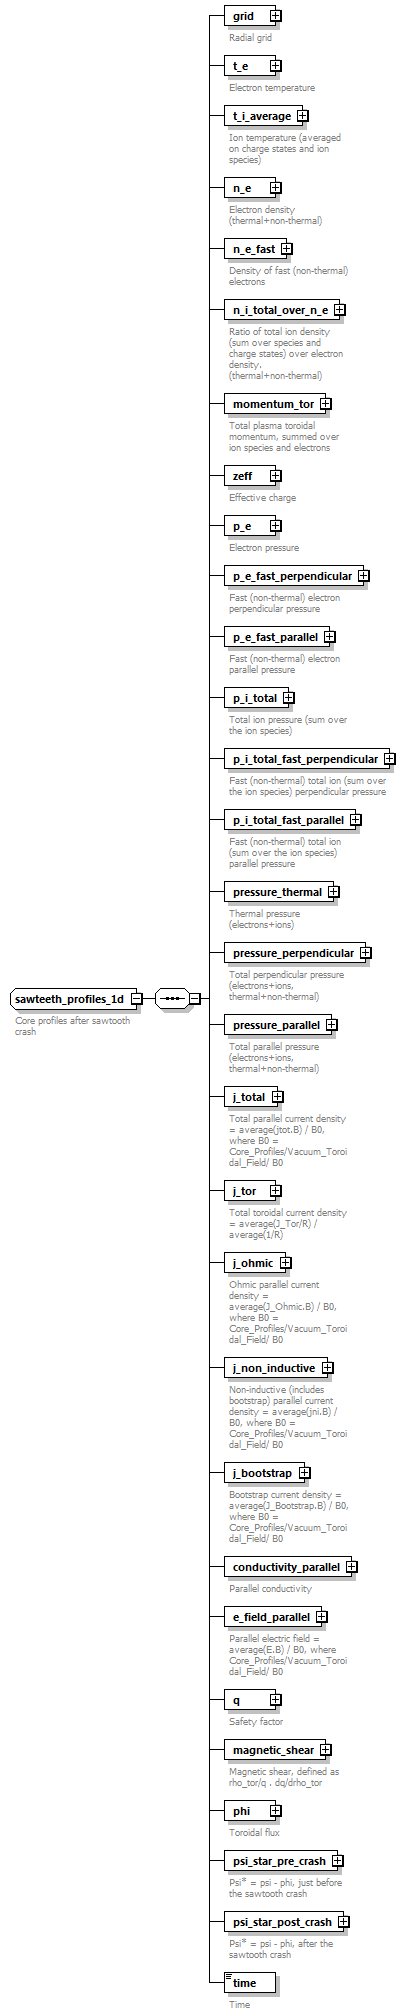 dd_physics_data_dictionary_p2256.png